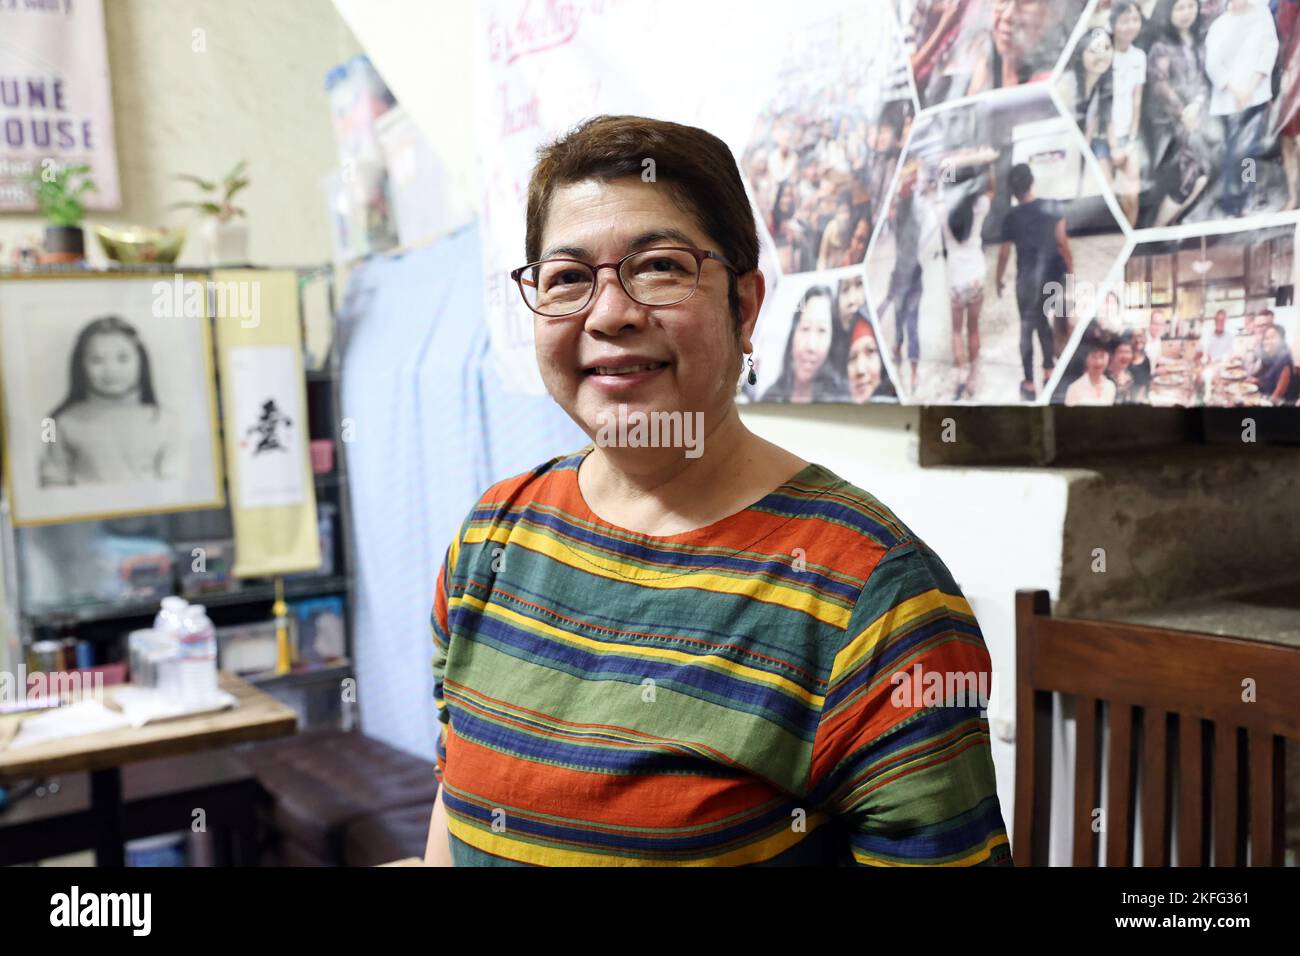 (For OSC) Edwina Antonio-Santoyo, Executive Director of The Bethune House Migrant Women's Refuge, Jordan. The Bethune House is a refuge for migrant women workers.  13OCT22 SCMP /K. Y. Cheng Stock Photo